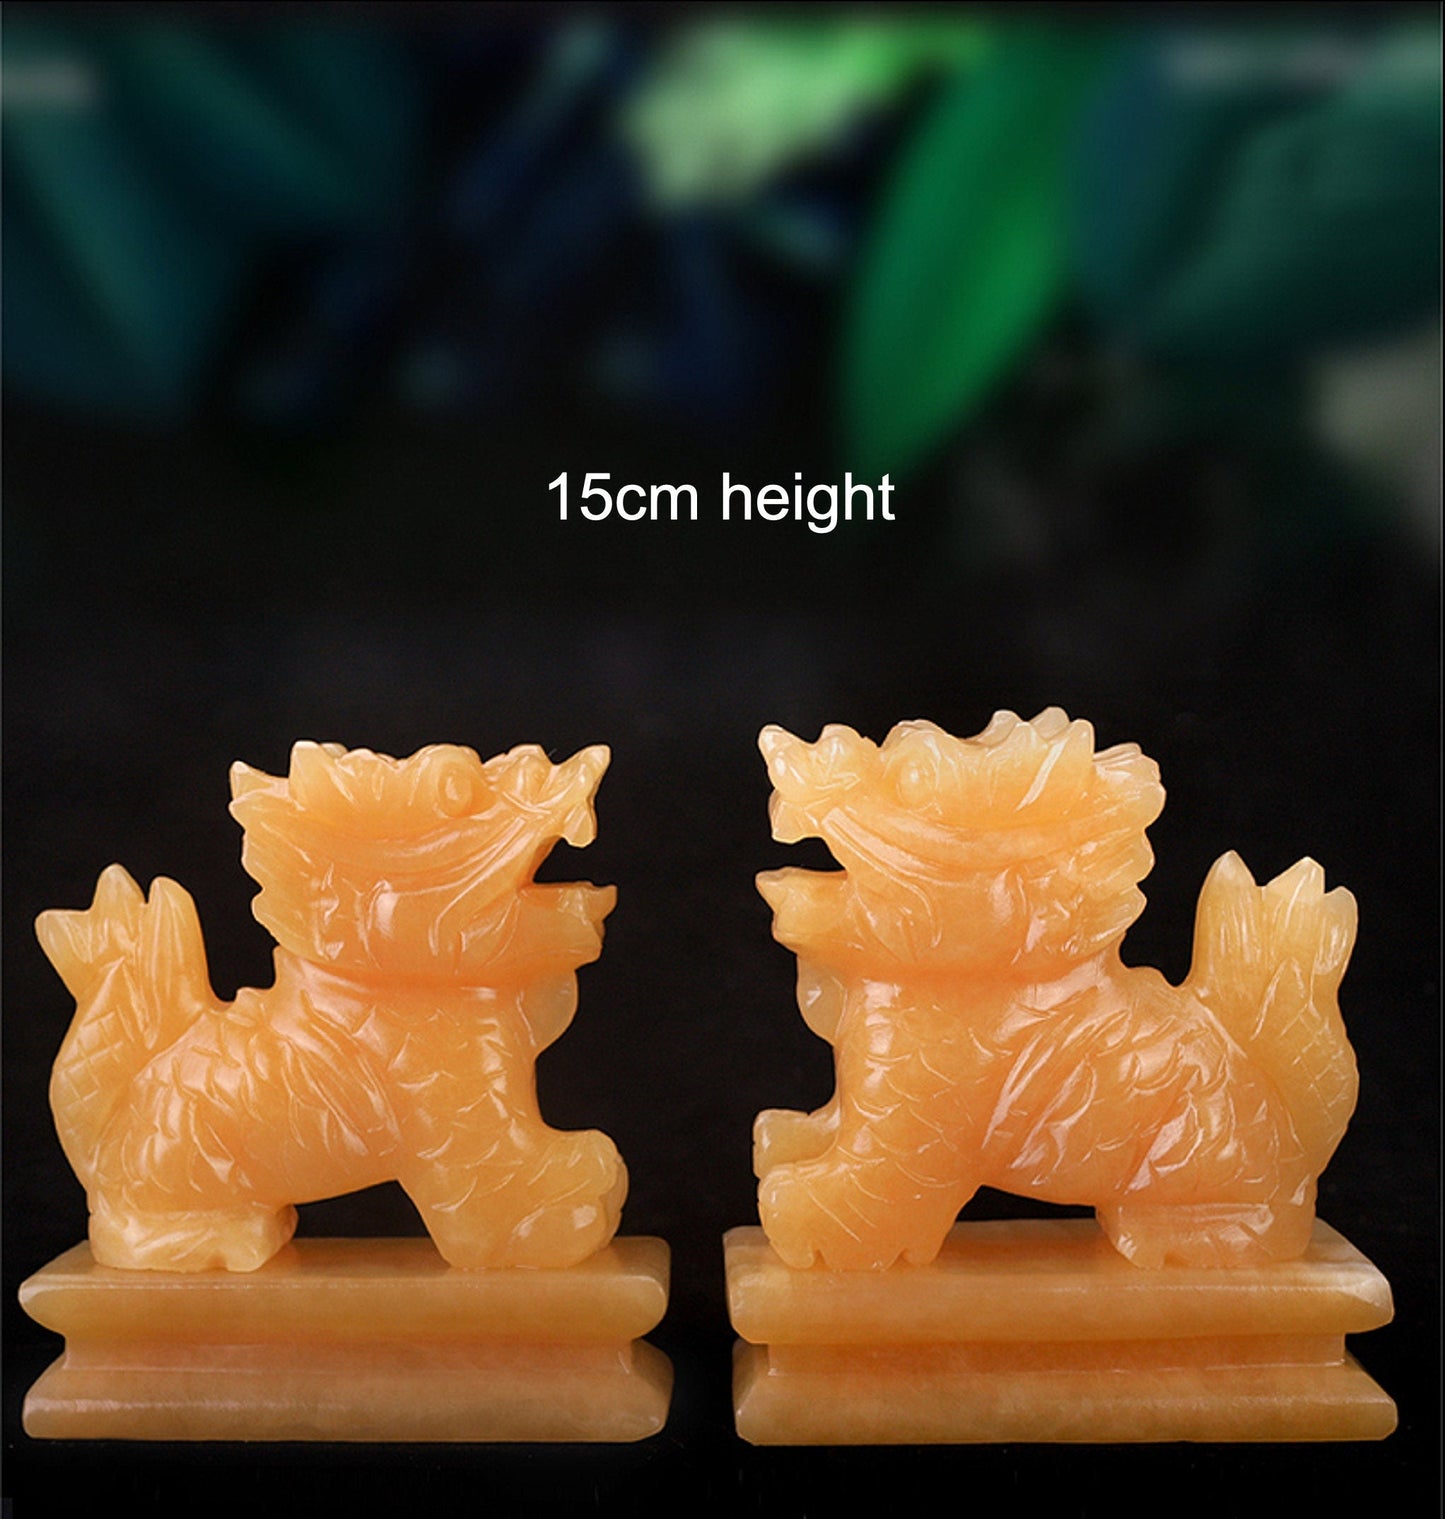 Auspicious Jade Stone Kirin Dragon Sculpture & Statue | Fengshui | Good Fortune and Prosperity | Home Decor | Office Blessing